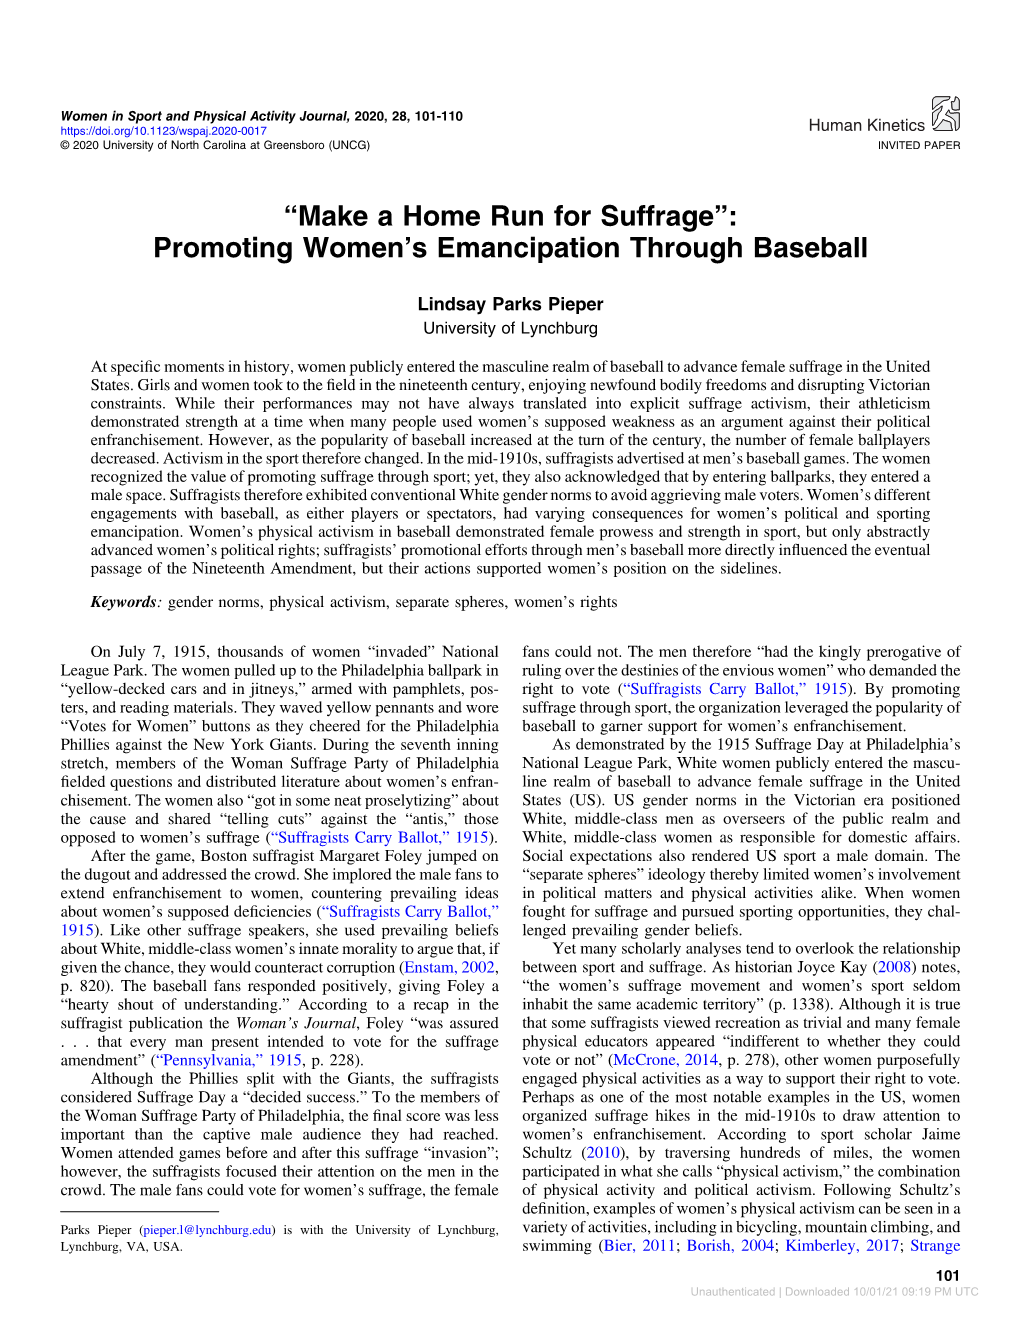 “Make a Home Run for Suffrage”: Promoting Women's Emancipation